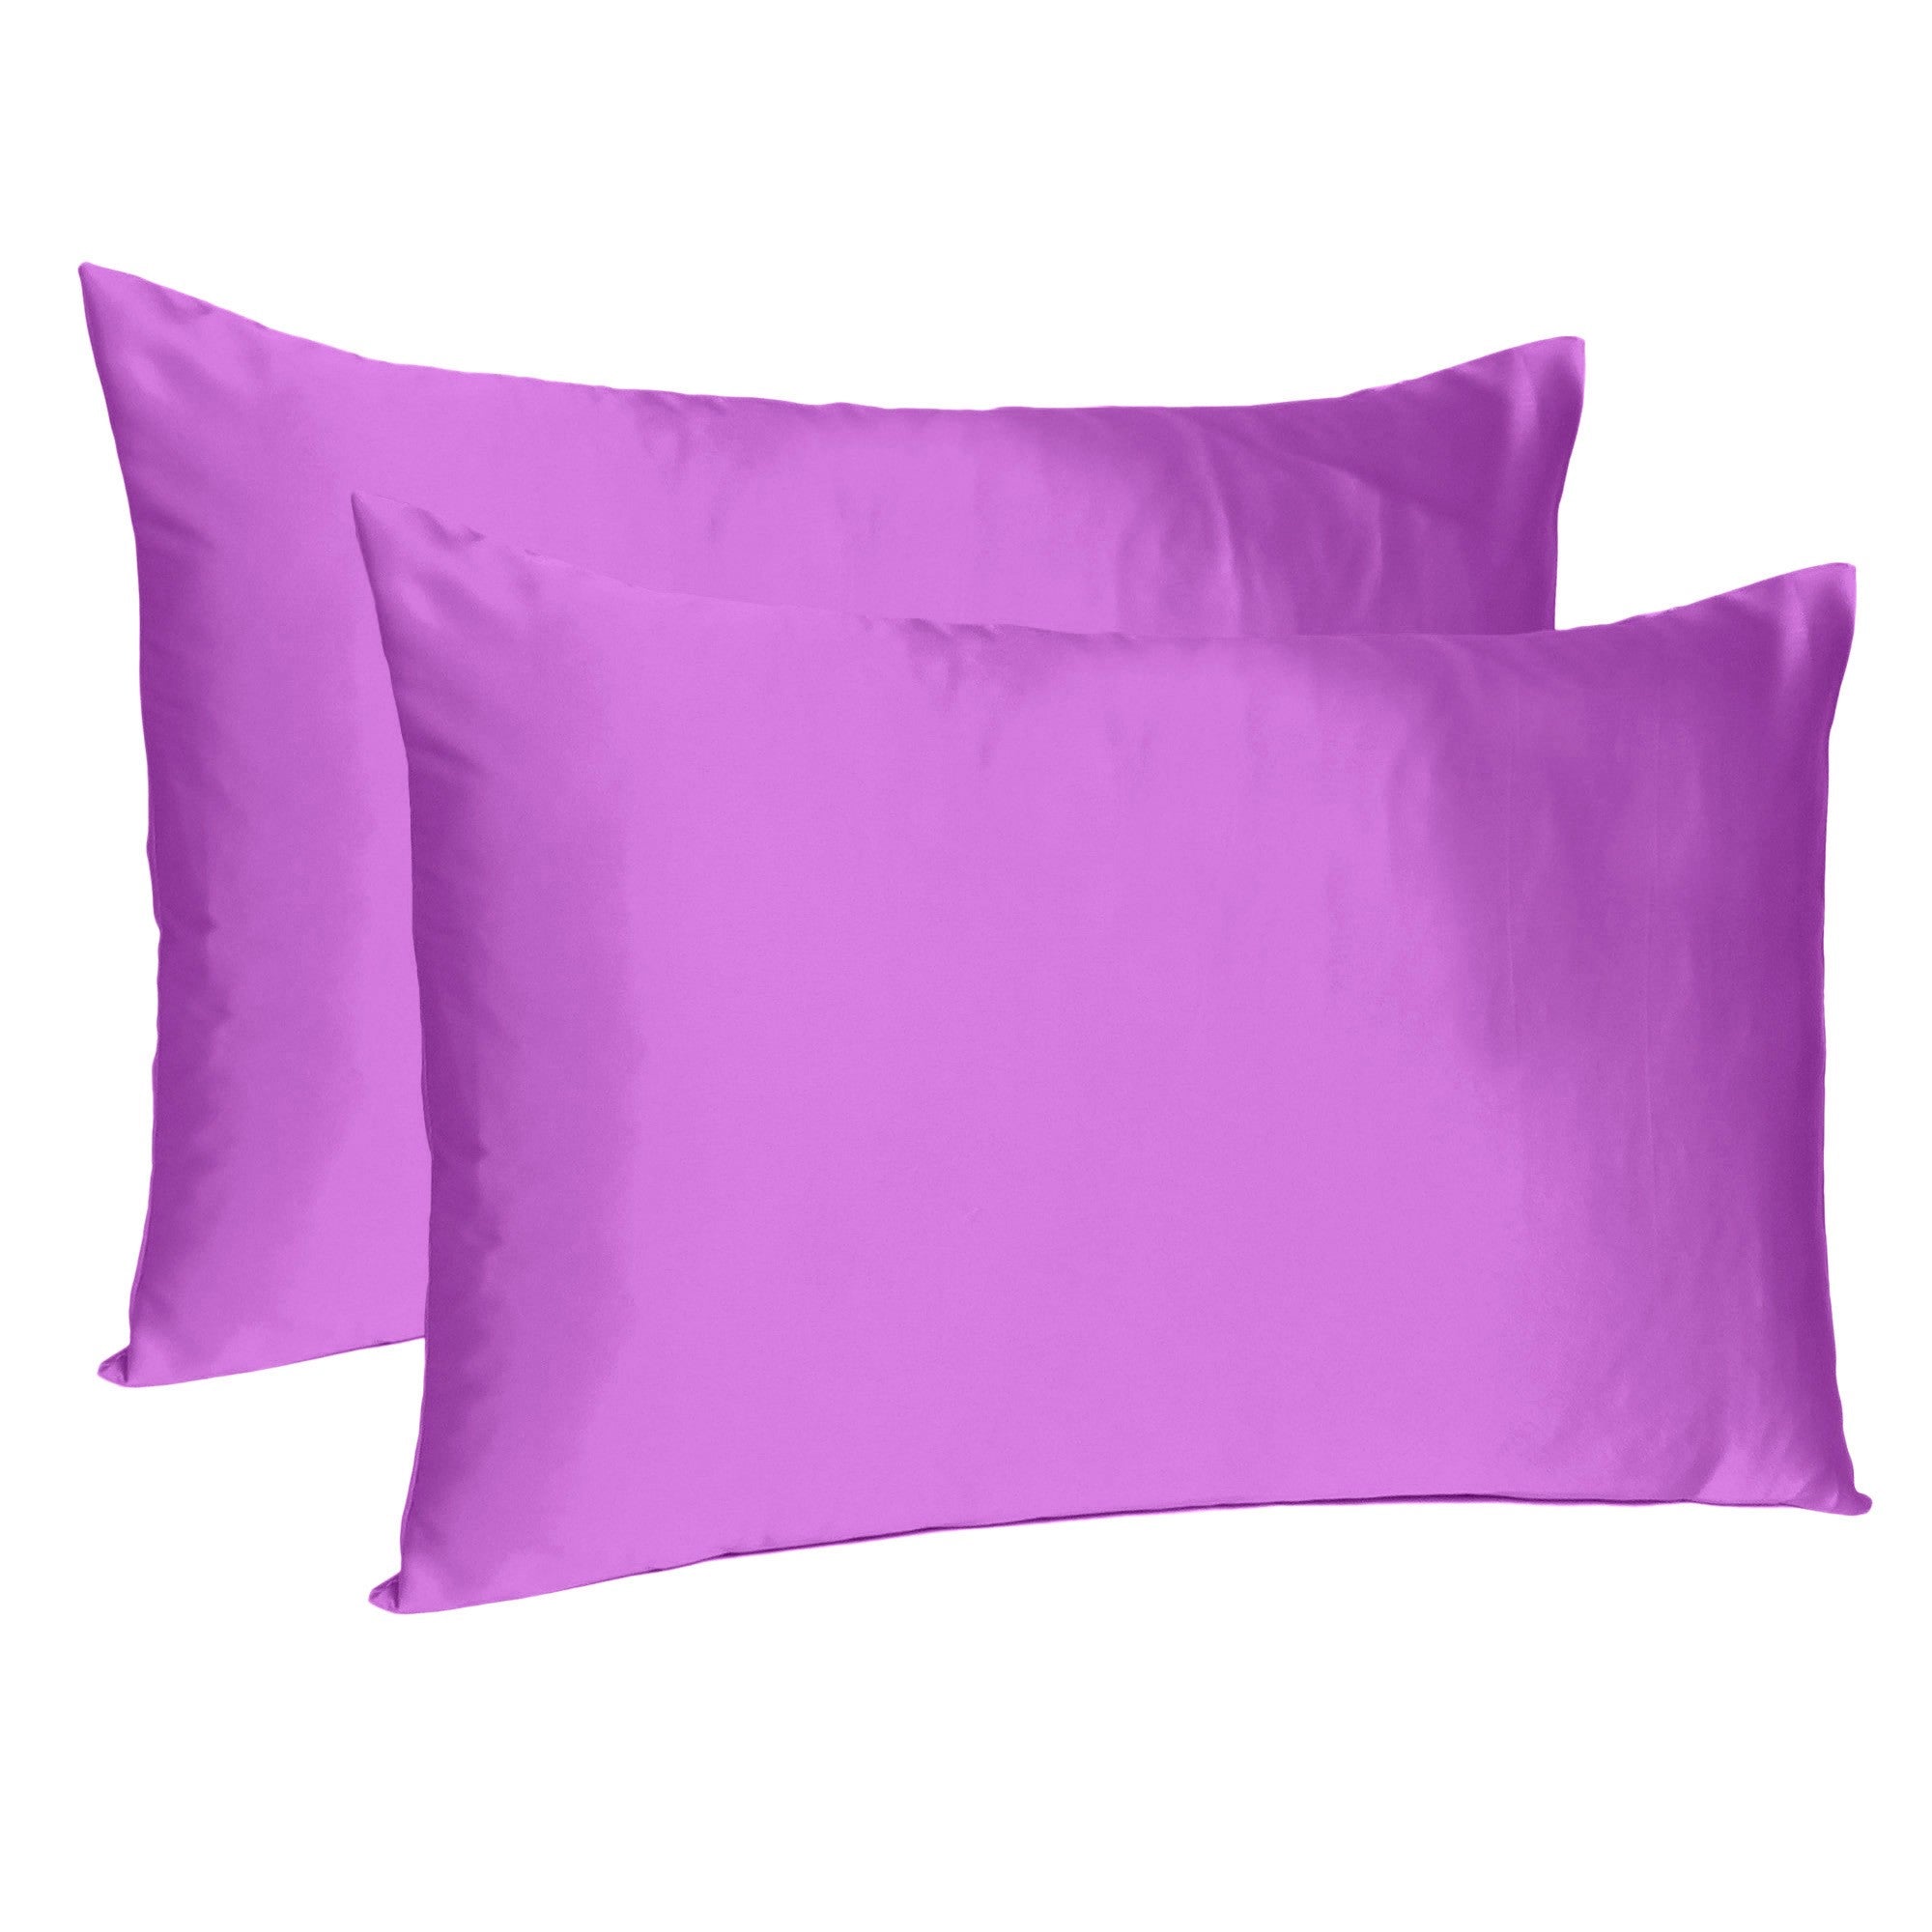 Purple-Merlot-Dreamy-Set-Of-2-Silky-Satin-Queen-Pillowcases-Bed-Sheets